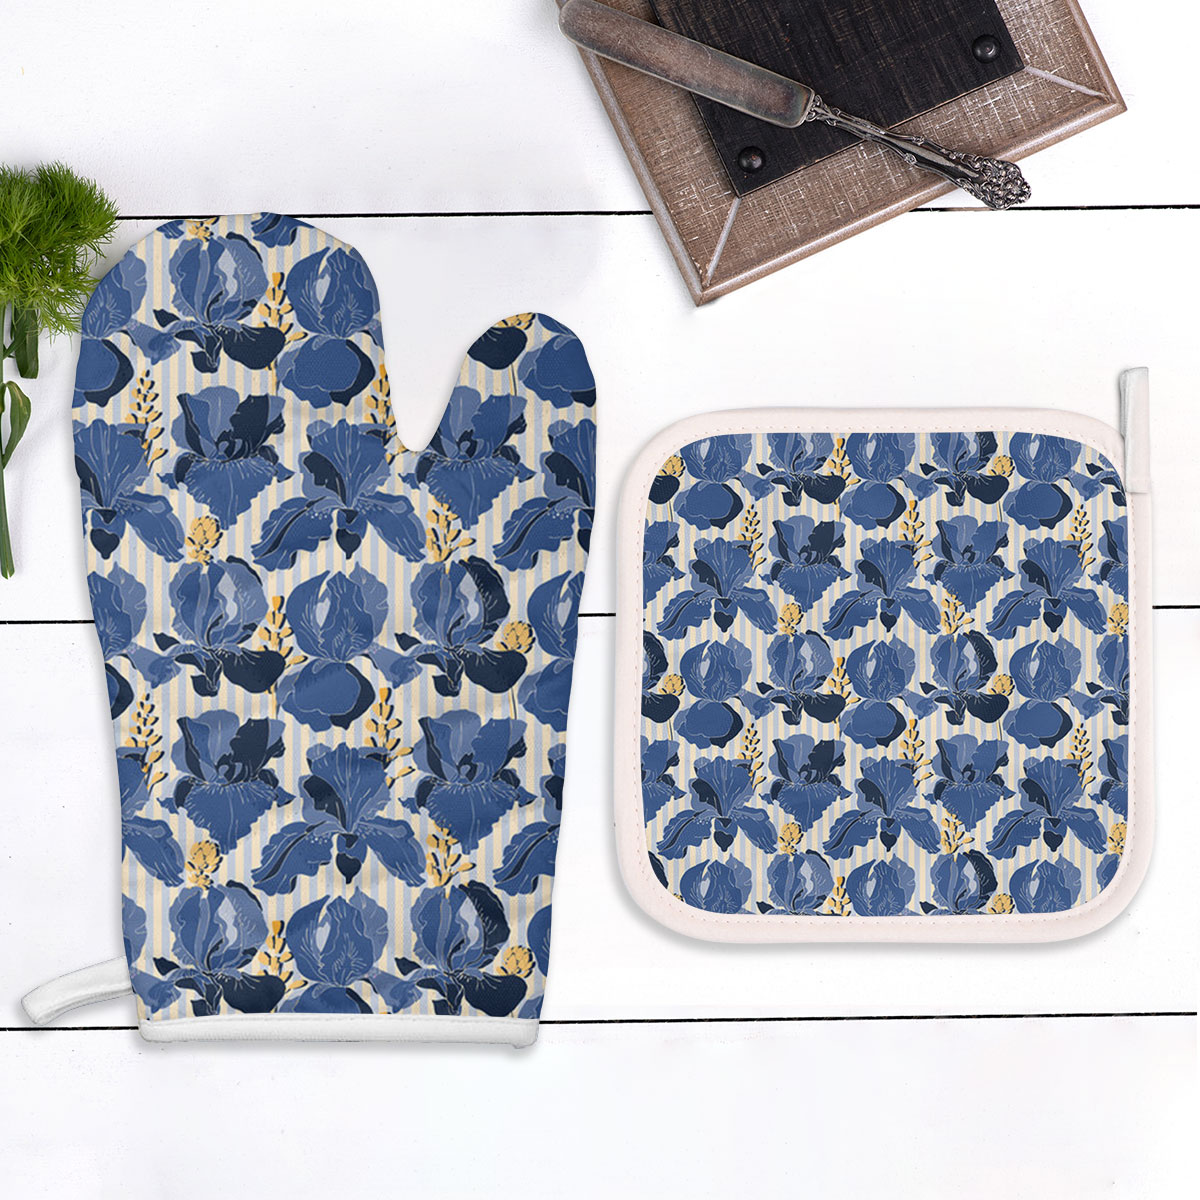 Blue Iris Flowers Isolated On A Light White And Yellow Striped Oven Mitts Pot Holder Set